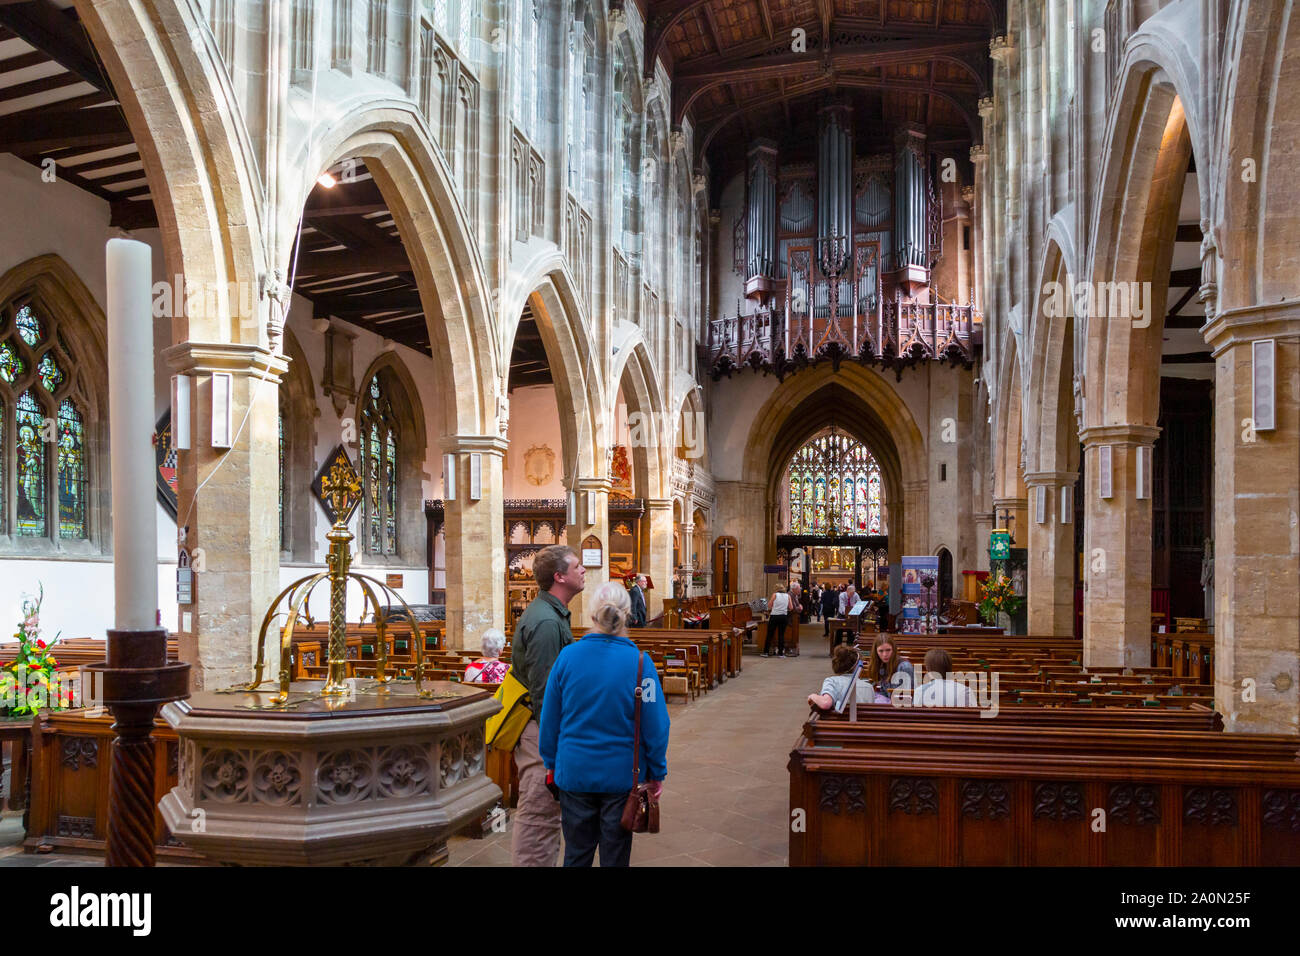 Stratford-upon-Avon, Warwickshire, England.  Visitors admiring interior of Holy Trinity Church.  William Shakespeare and Anne Hathaway are buried in t Stock Photo